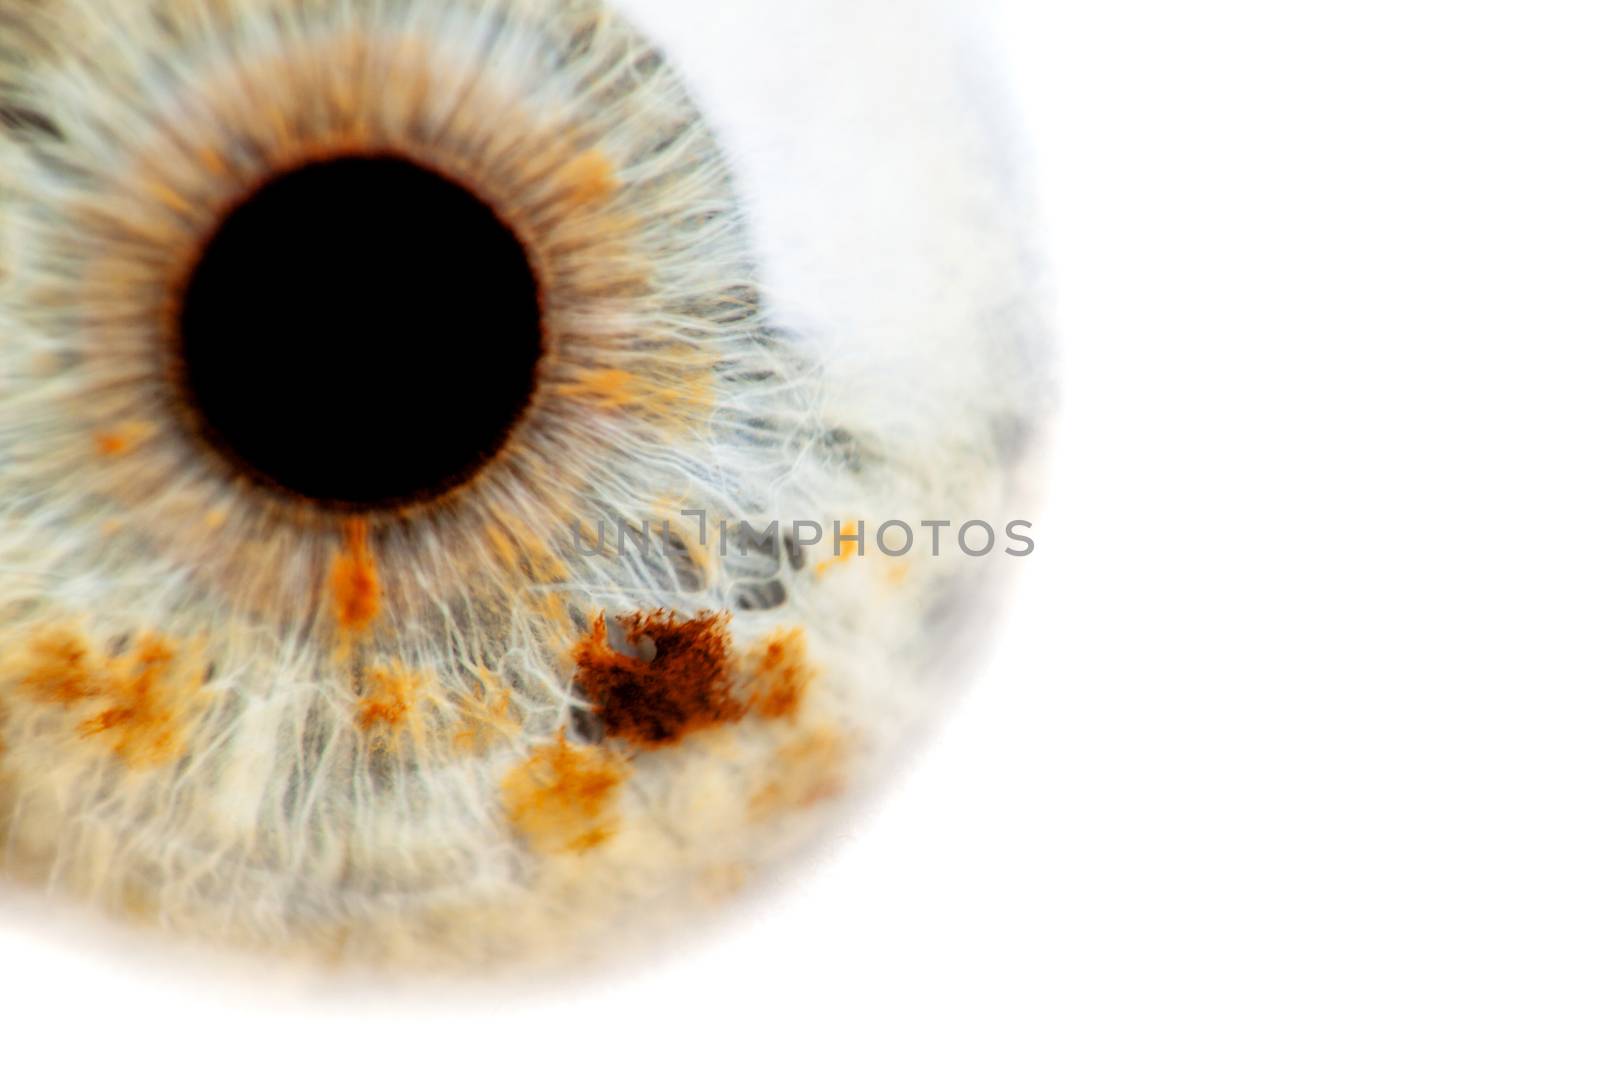 extreme close up of a human eye with reddish dots, shallow depth of field